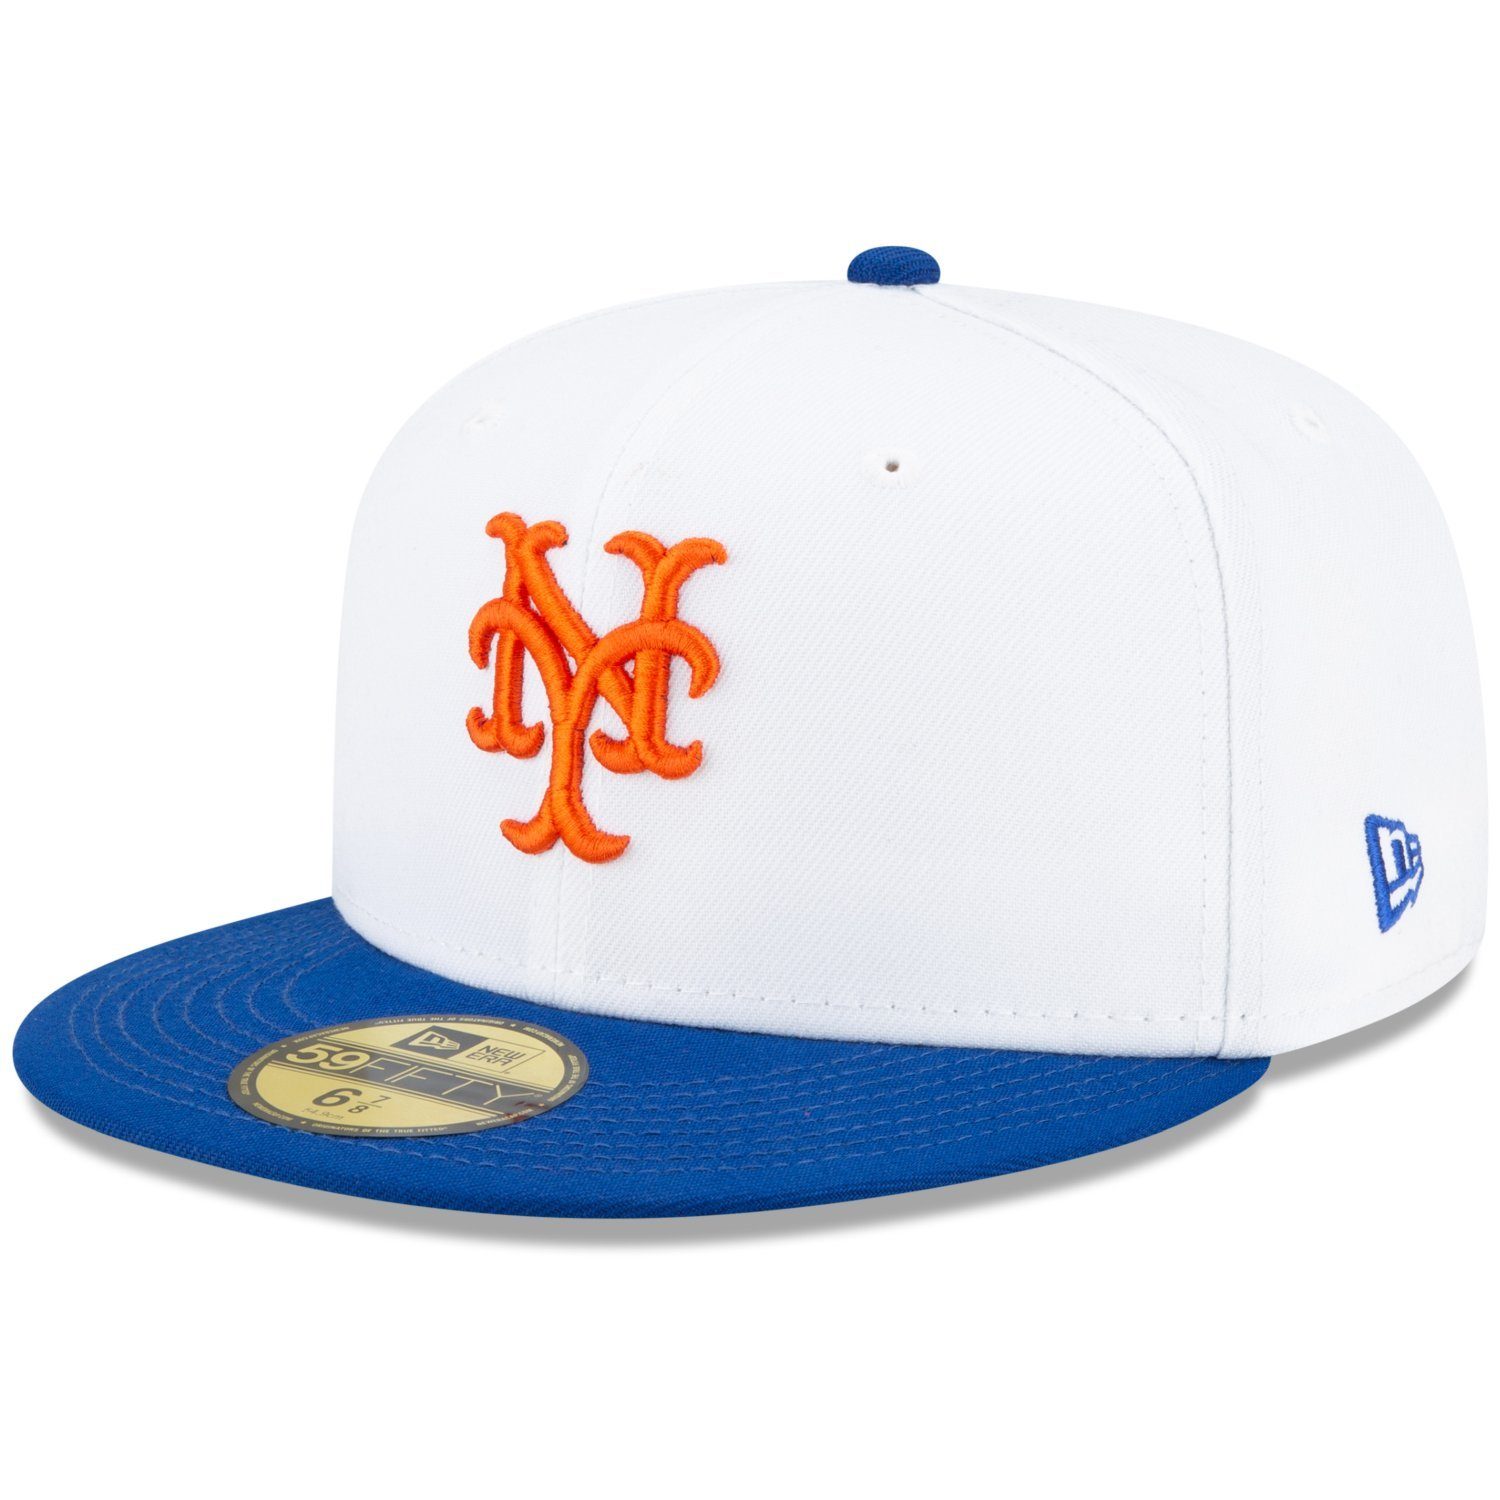 Era York SERIES Fitted Cap WORLD 1969 59Fifty Mets New New